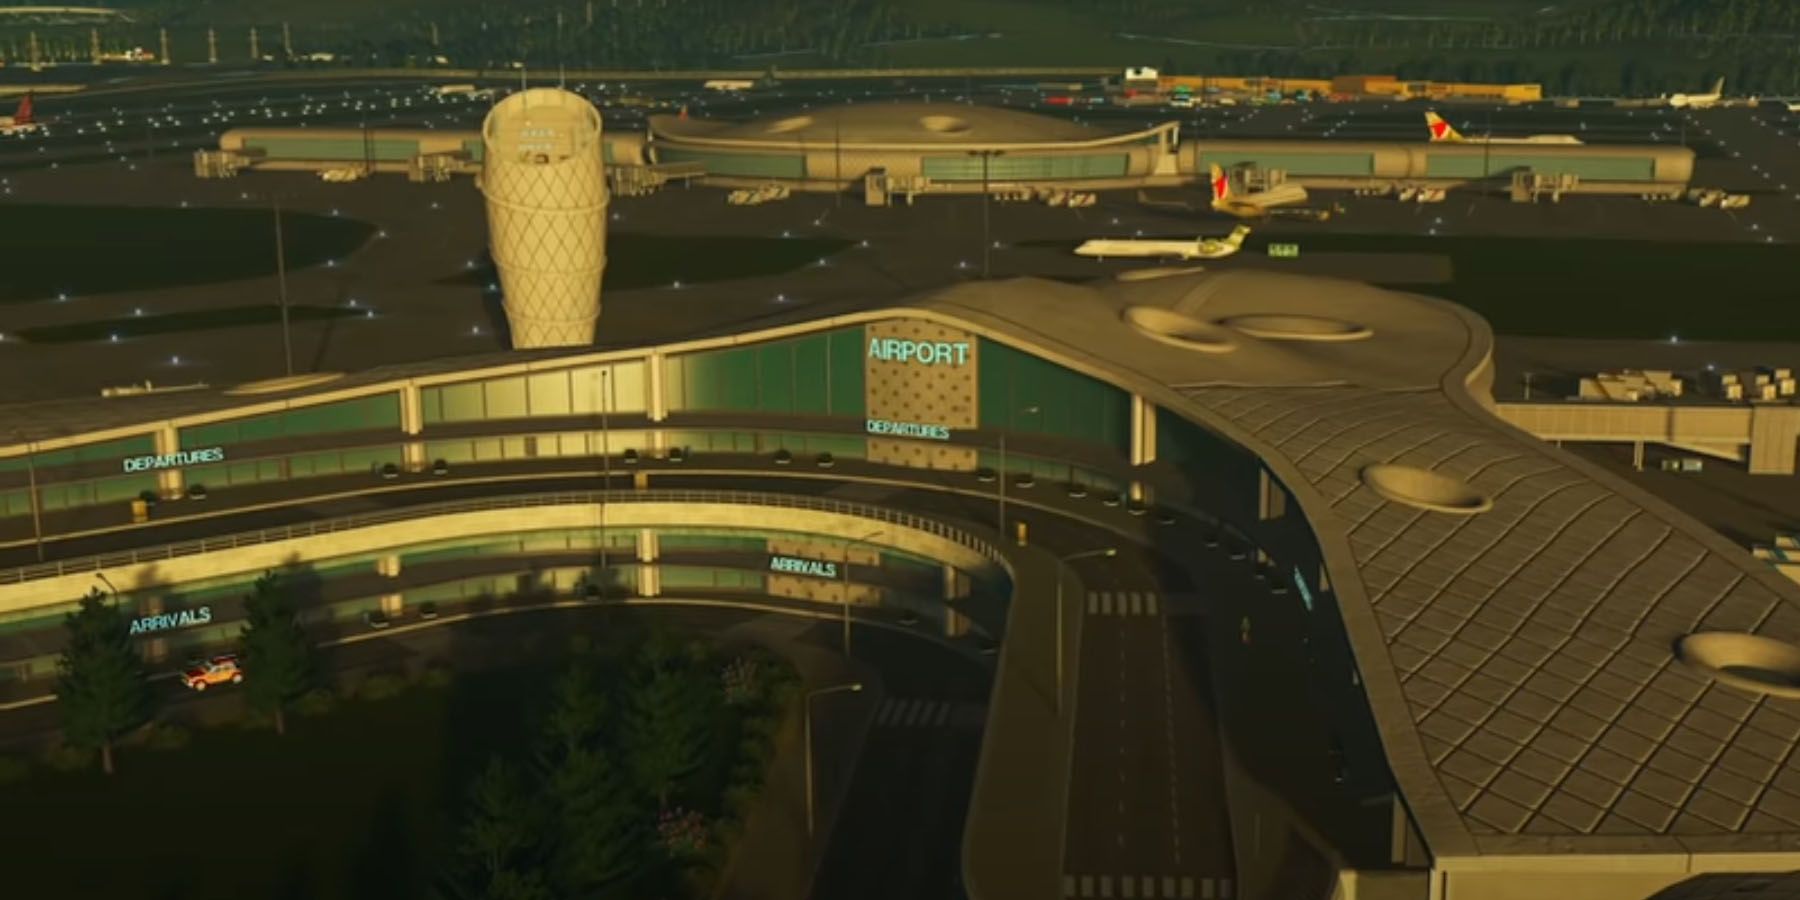 A beautiful airport terminal in the Airports DLC